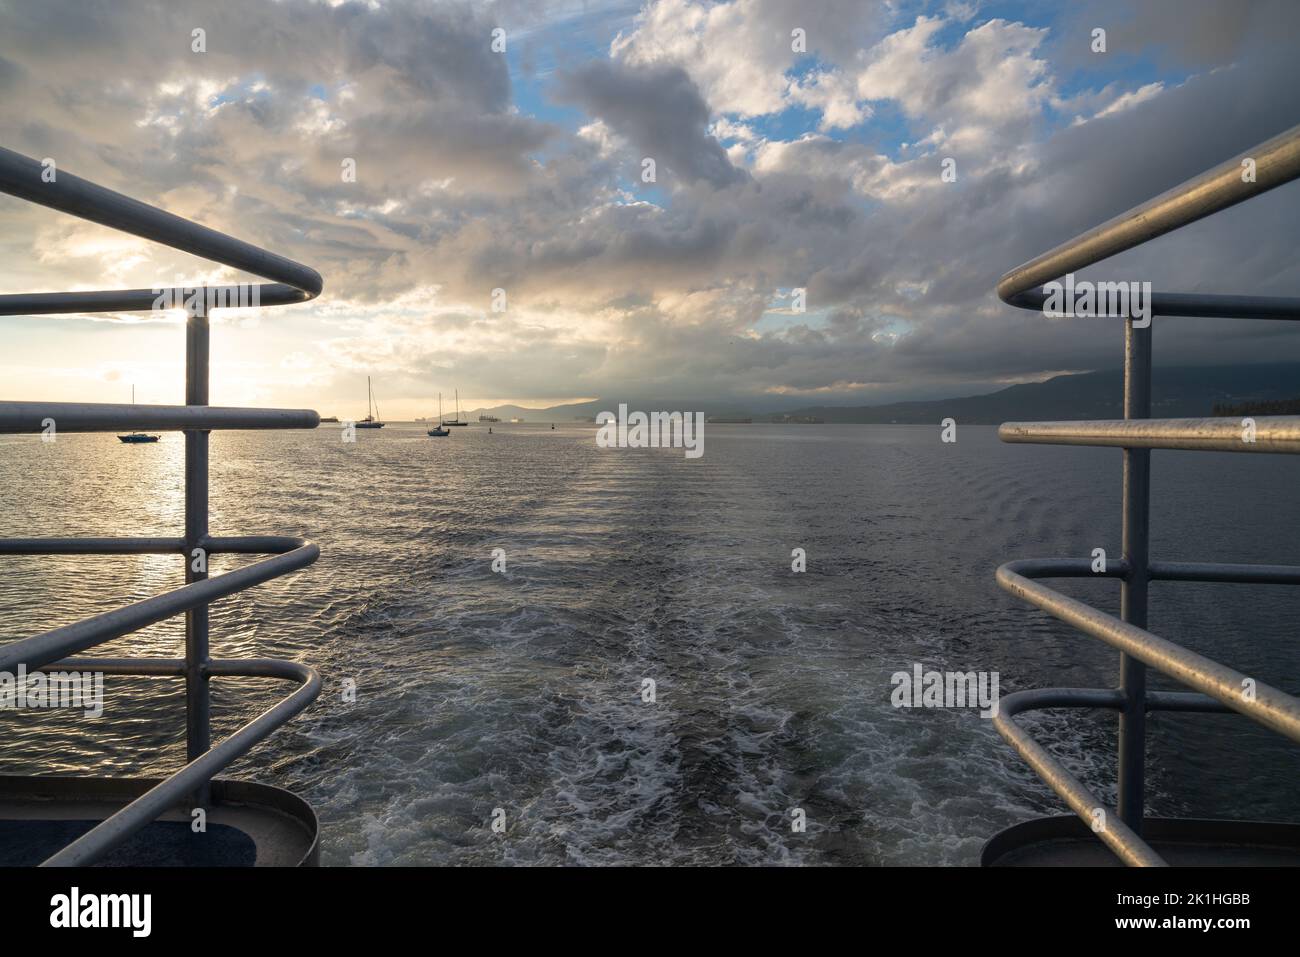 View from the taffrail of a whale watching ship, looking out over Burrard Inlet and all of the boats and container ships waiting offshore. Stock Photo